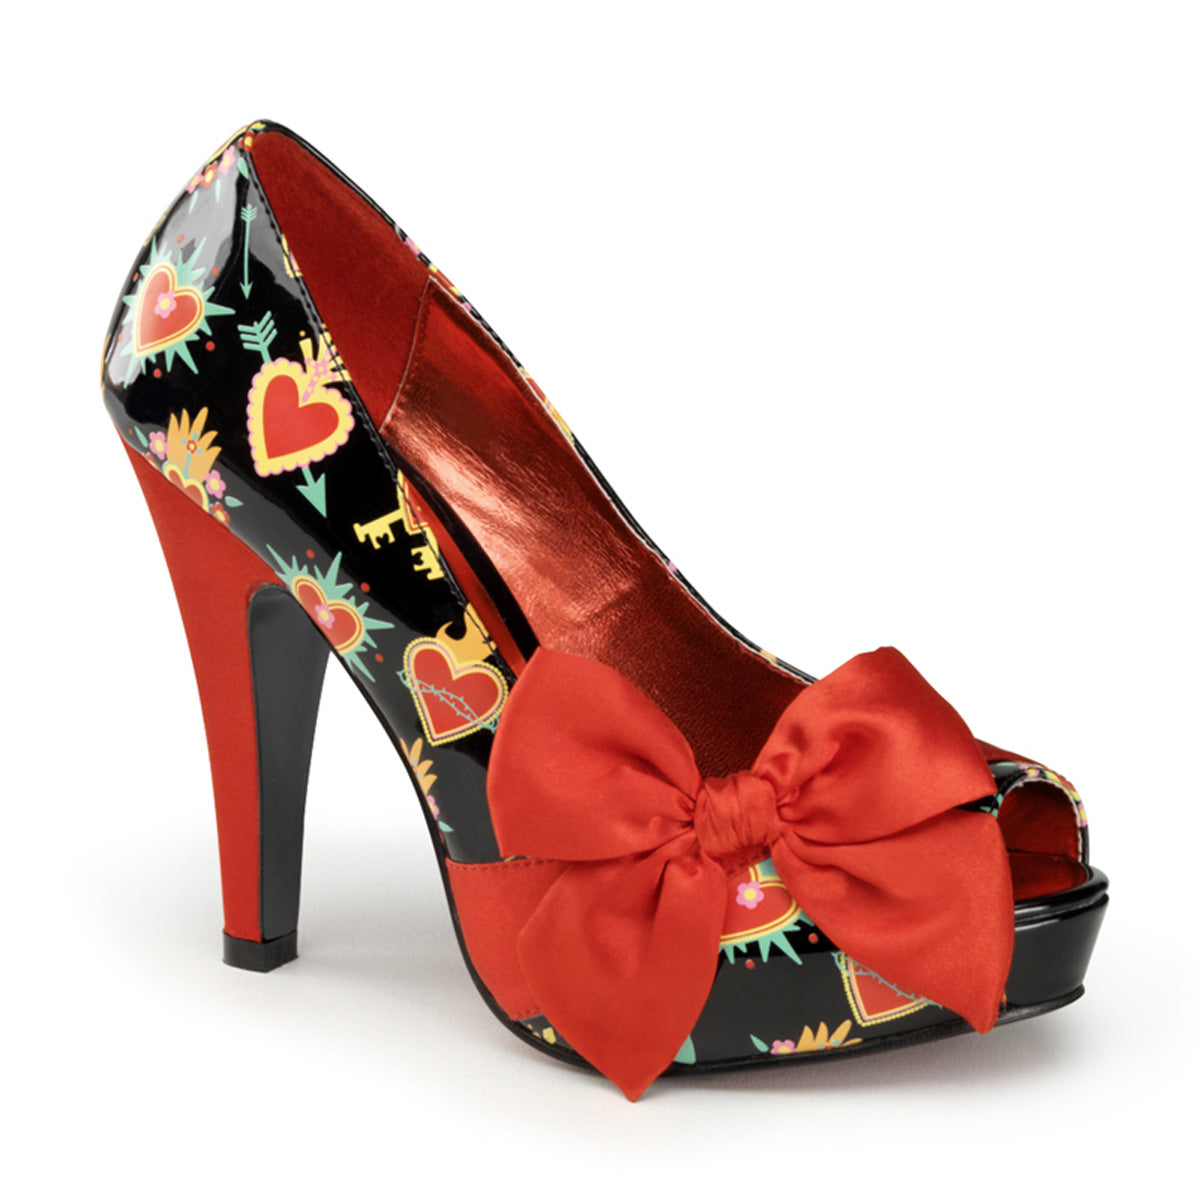 Pin Up Couture Womens Pumps BETTIE-13 Blk Pat-Red Satin (Sacred Hearts)